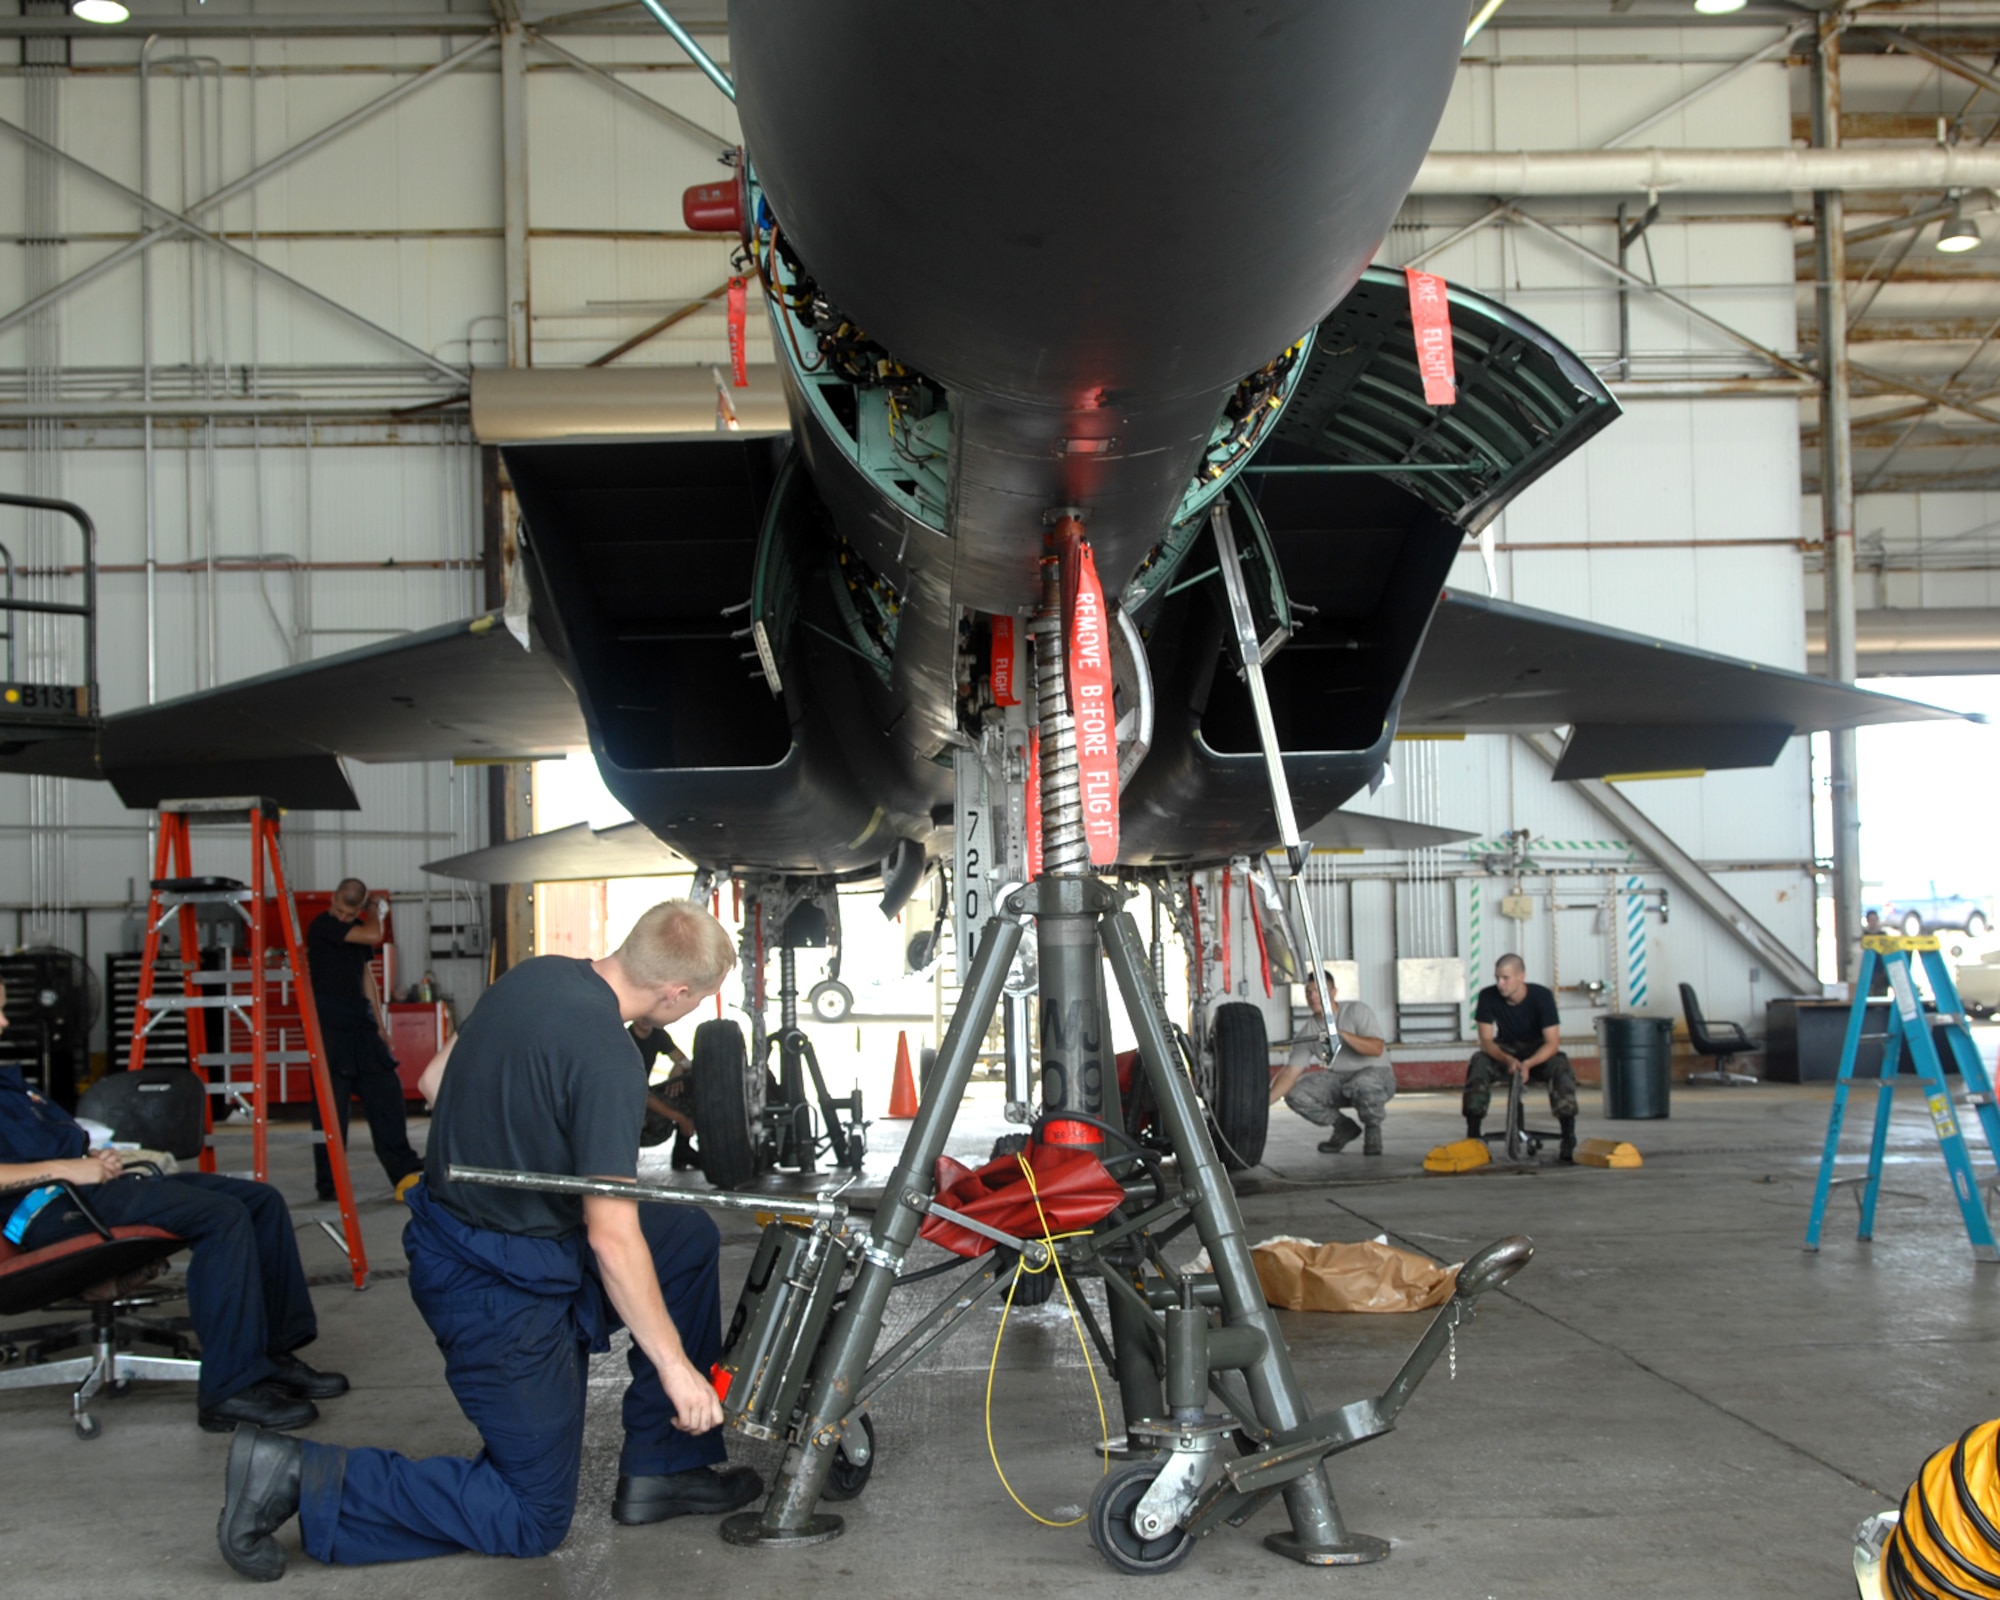 ANDERSEN AIR FORCE BASE, Guam - Members of the 389th Expeditionary Aircraft Maintenance Squadron, lower an F-15E Strike Eagle during its phase maintenance Aug. 14. A phase inspection is a group of maintenance squadron flights working together towards a common goal, which is the completion of the inspection, a phase inspection is a miniature overhaul for the aircraft that is performed every 400 flight hours. (U.S. Air Force photo by Airman 1st Class Cory Todd)